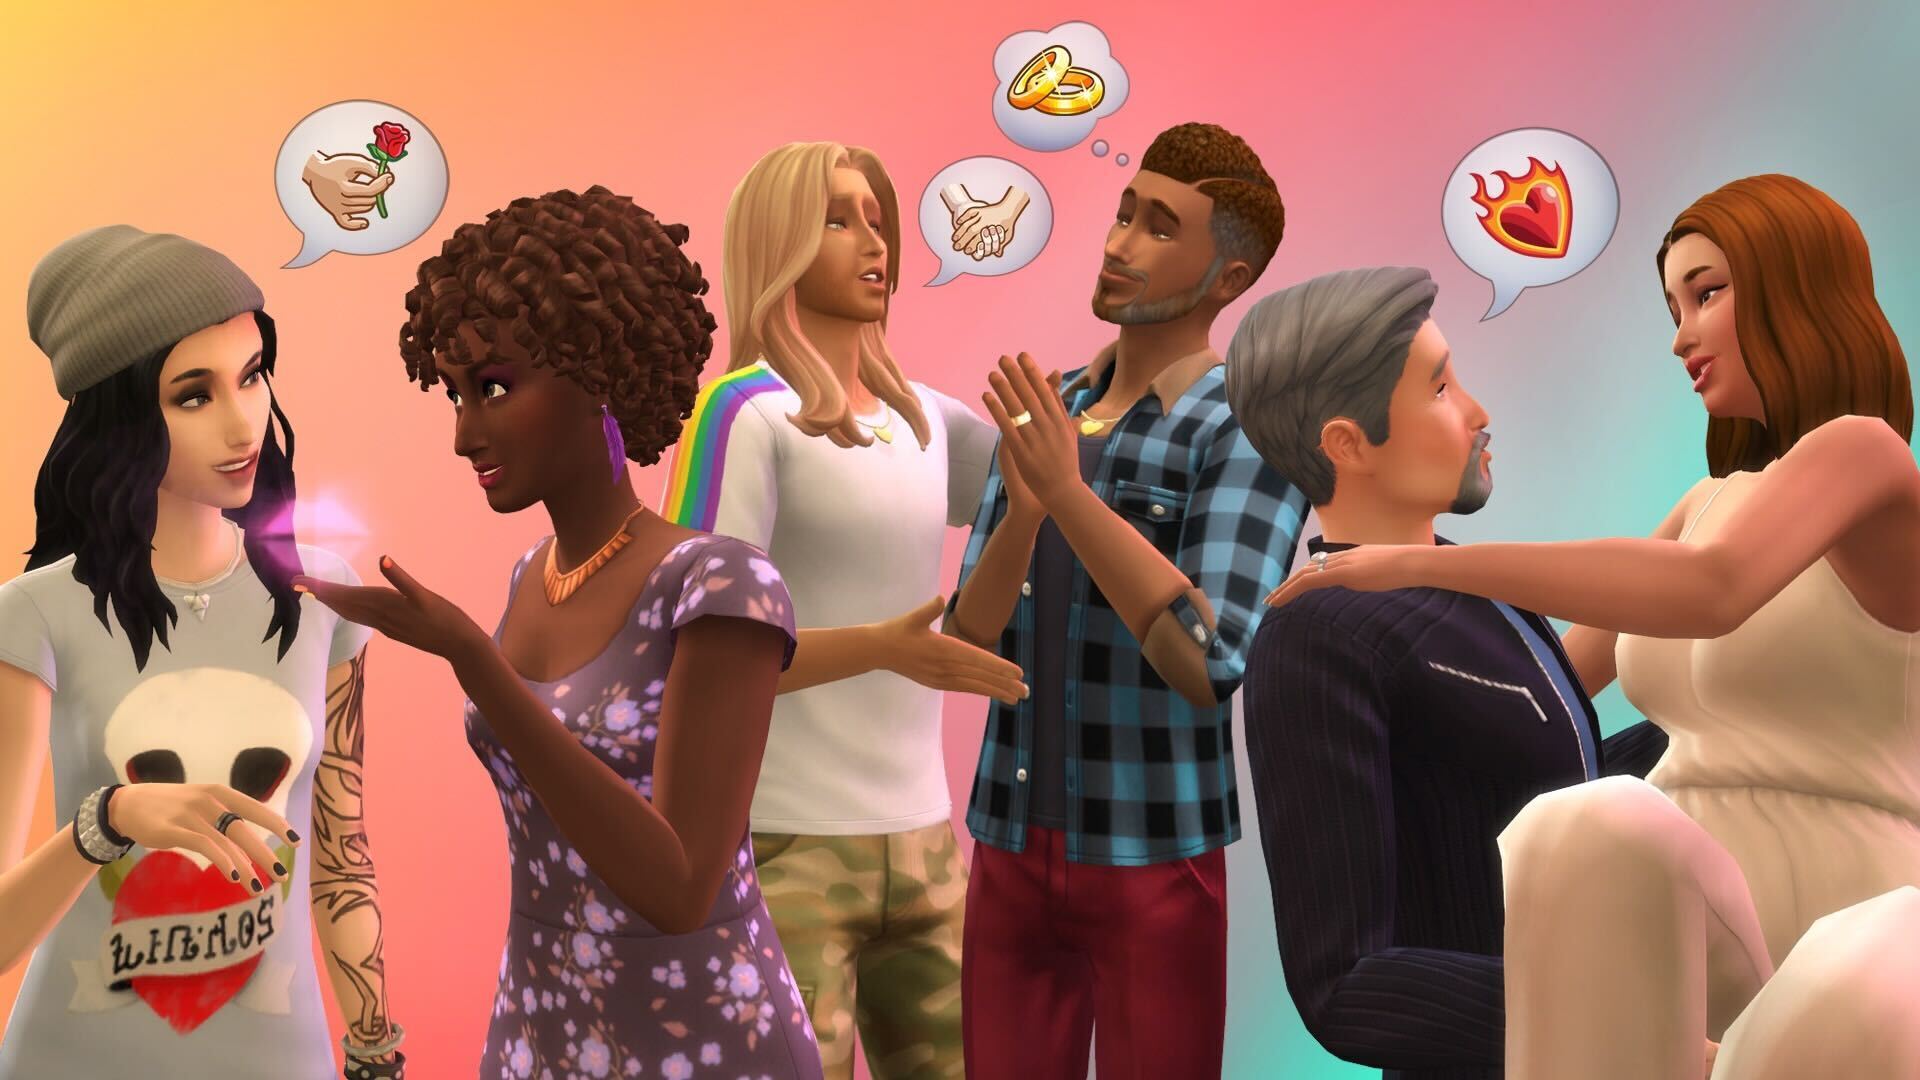 The Sims 4 releases new and inclusive character options